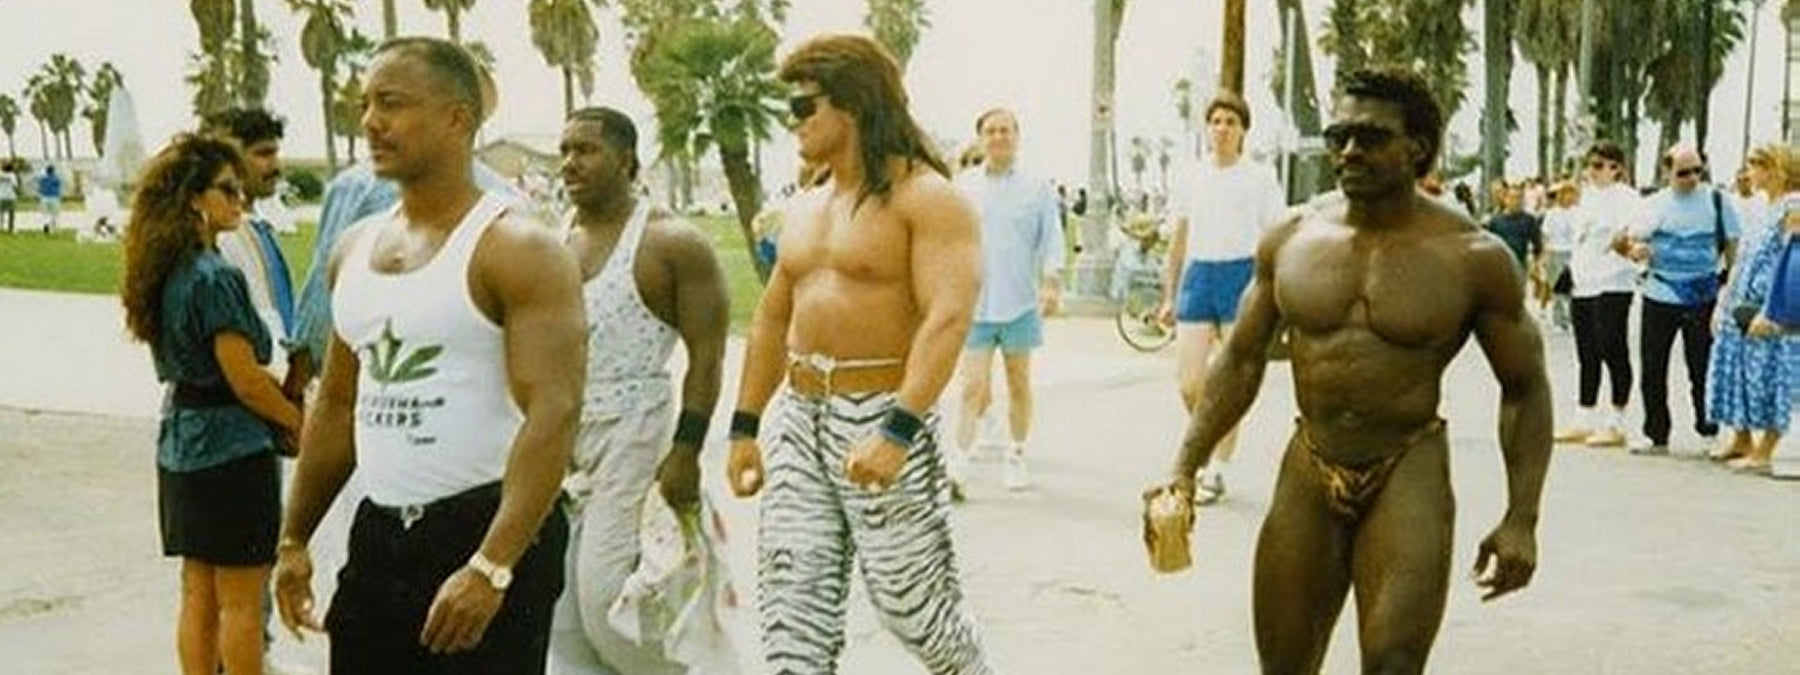 99 Funny & Frightening Bodybuilding Fashion Pics From the 1980s